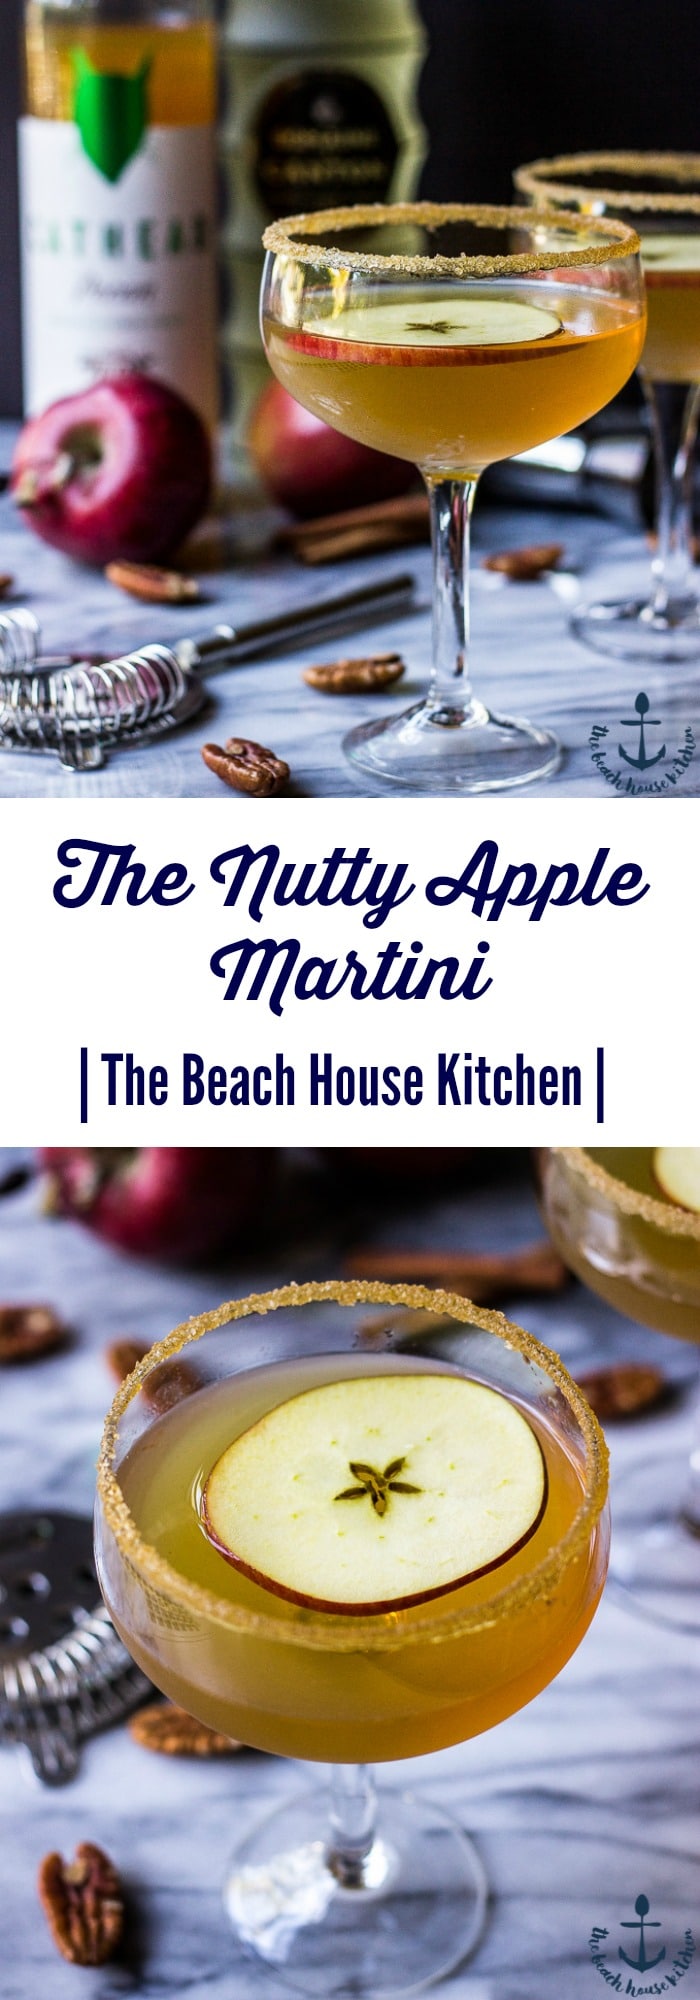 The Nutty Apple Martini